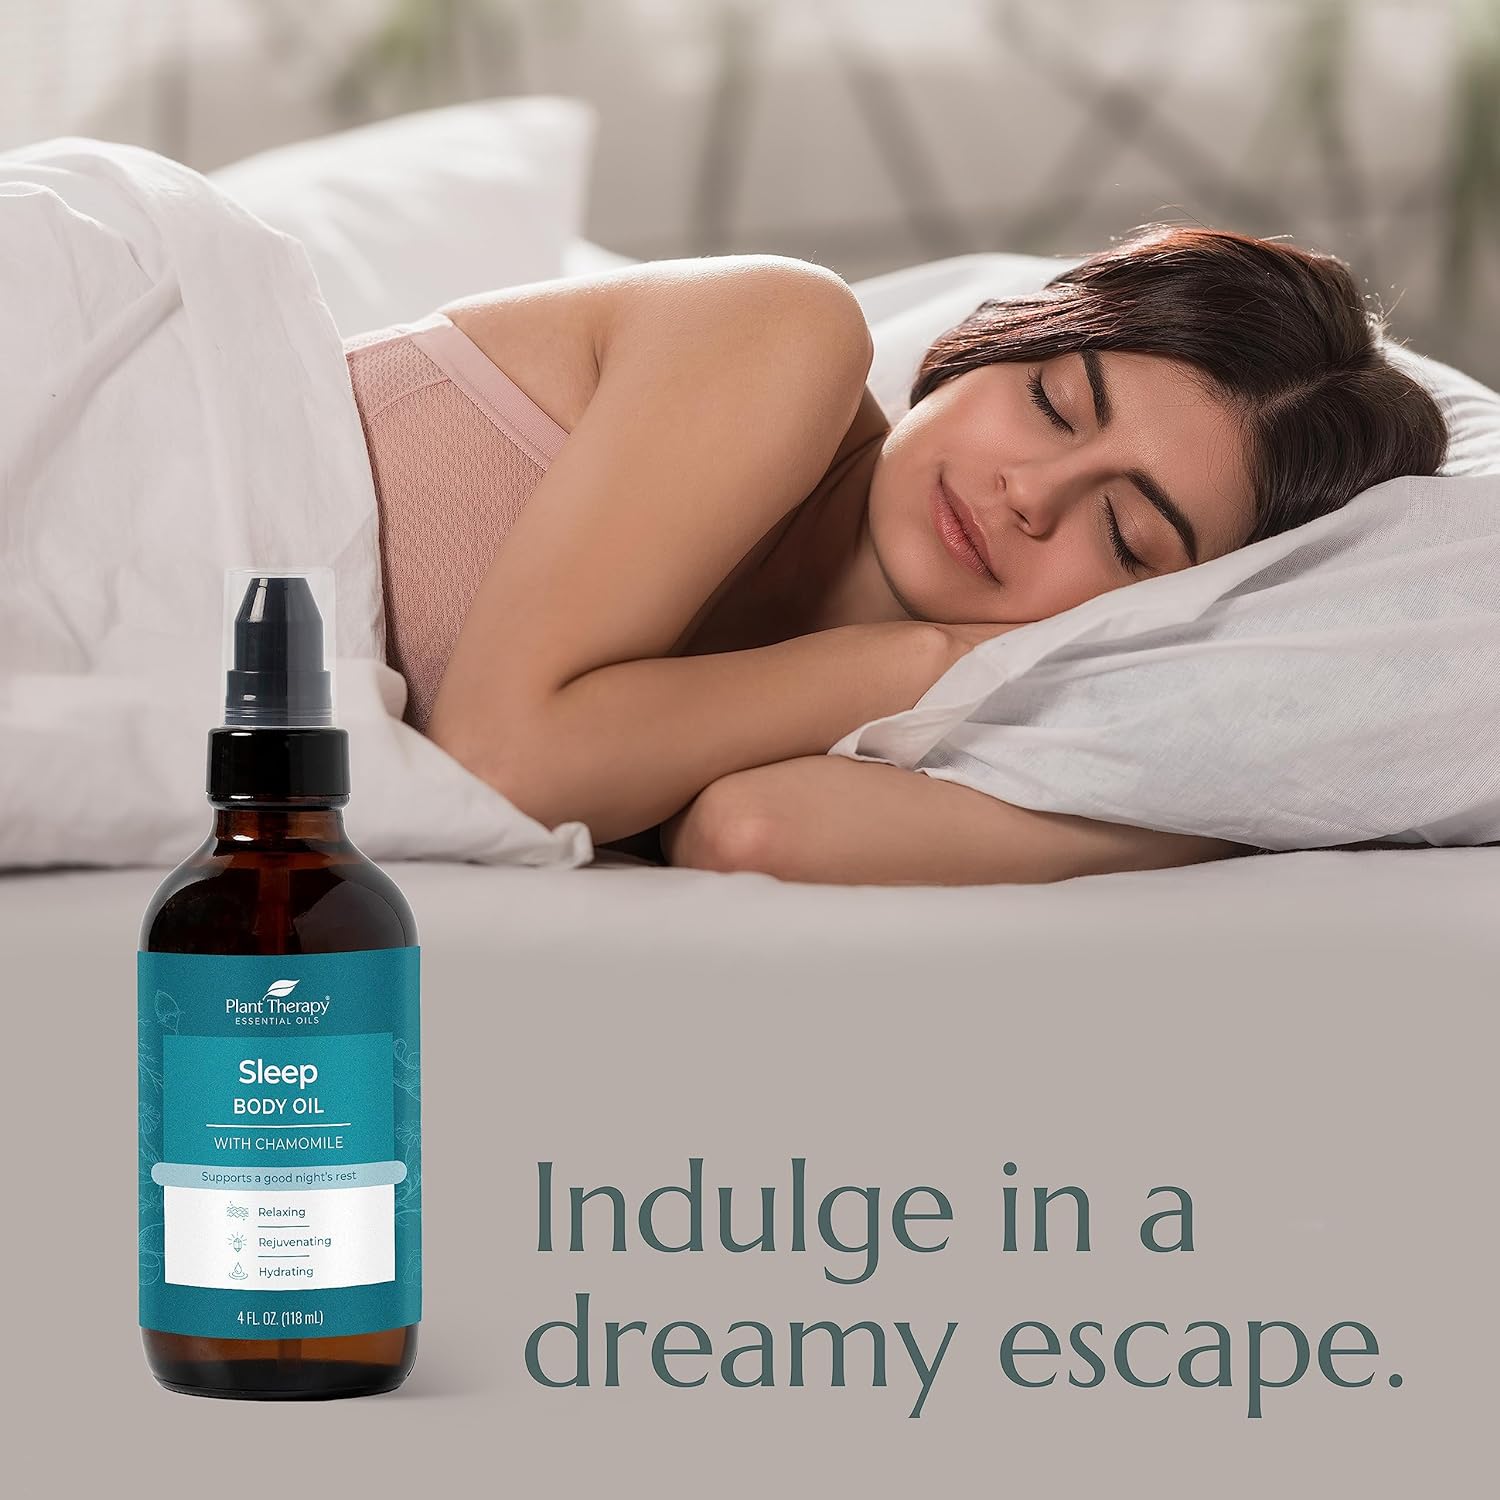 Plant Therapy Sleep Body Oil with Chamomile 4 oz Promotes a Good Night's Rest, Calms a Restless Mind & Body, Softens & Nourishes Skin : Beauty & Personal Care